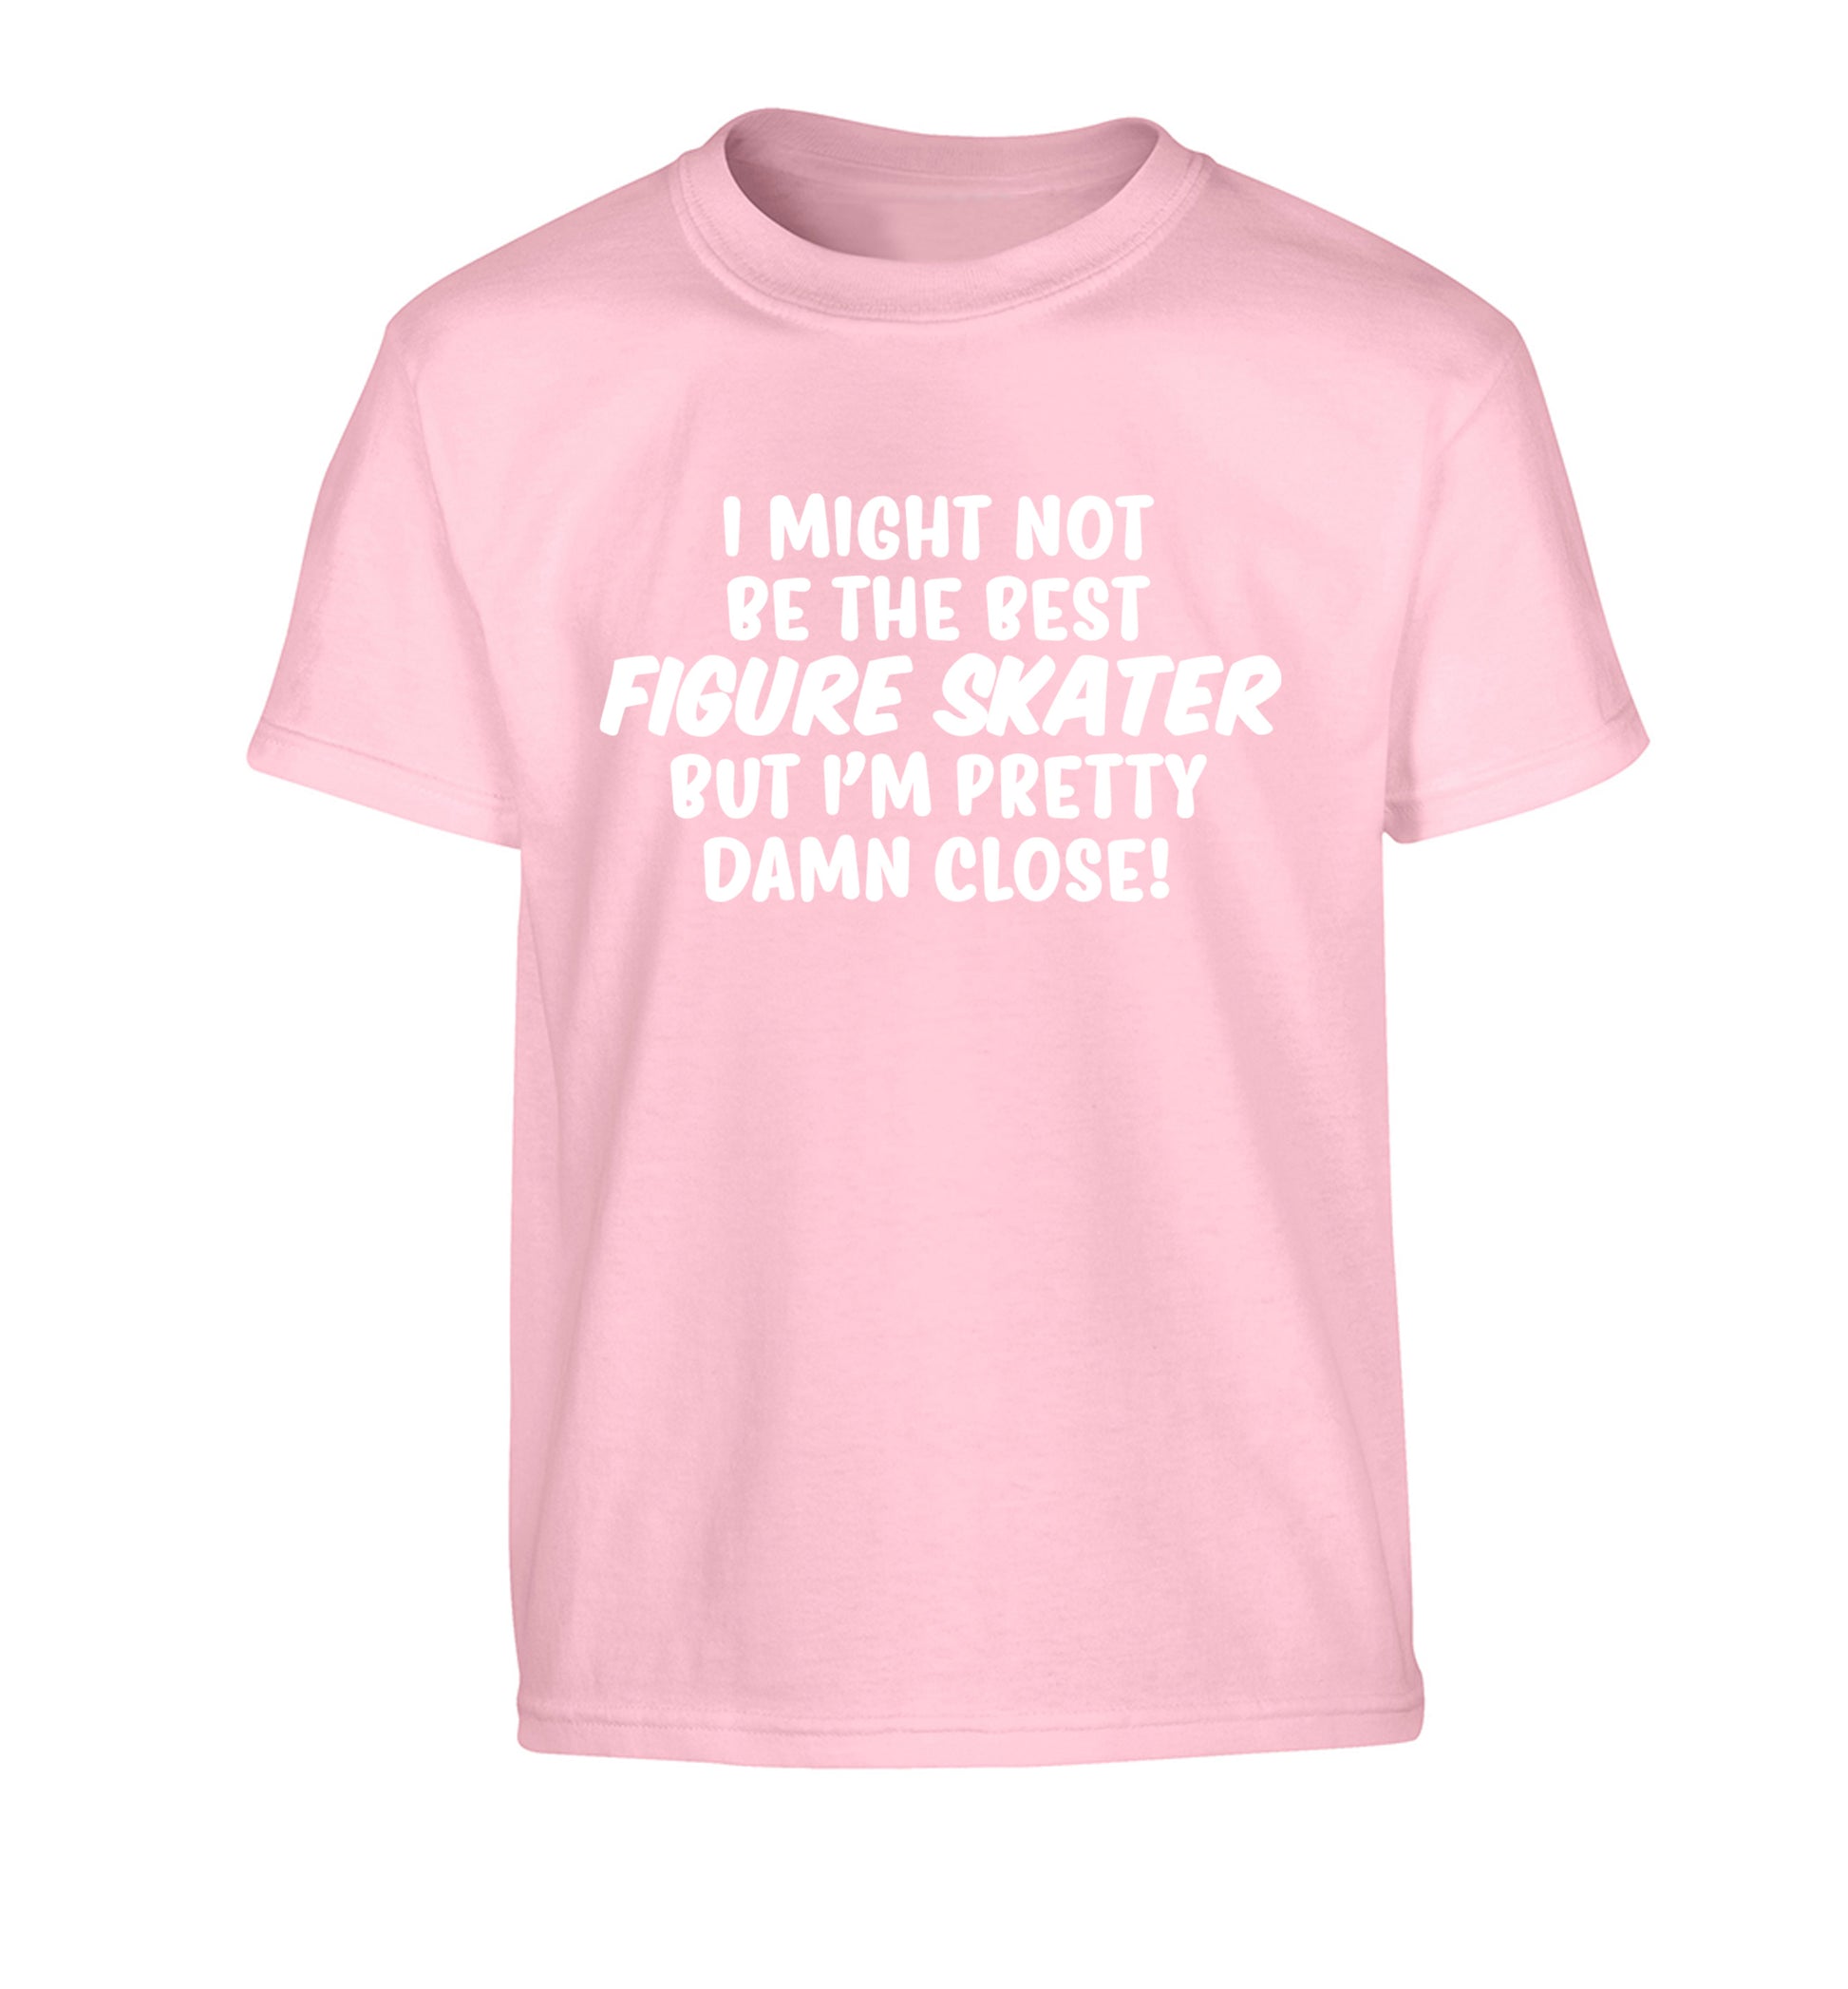 I might not be the best figure skater but I'm pretty damn close! Children's light pink Tshirt 12-14 Years